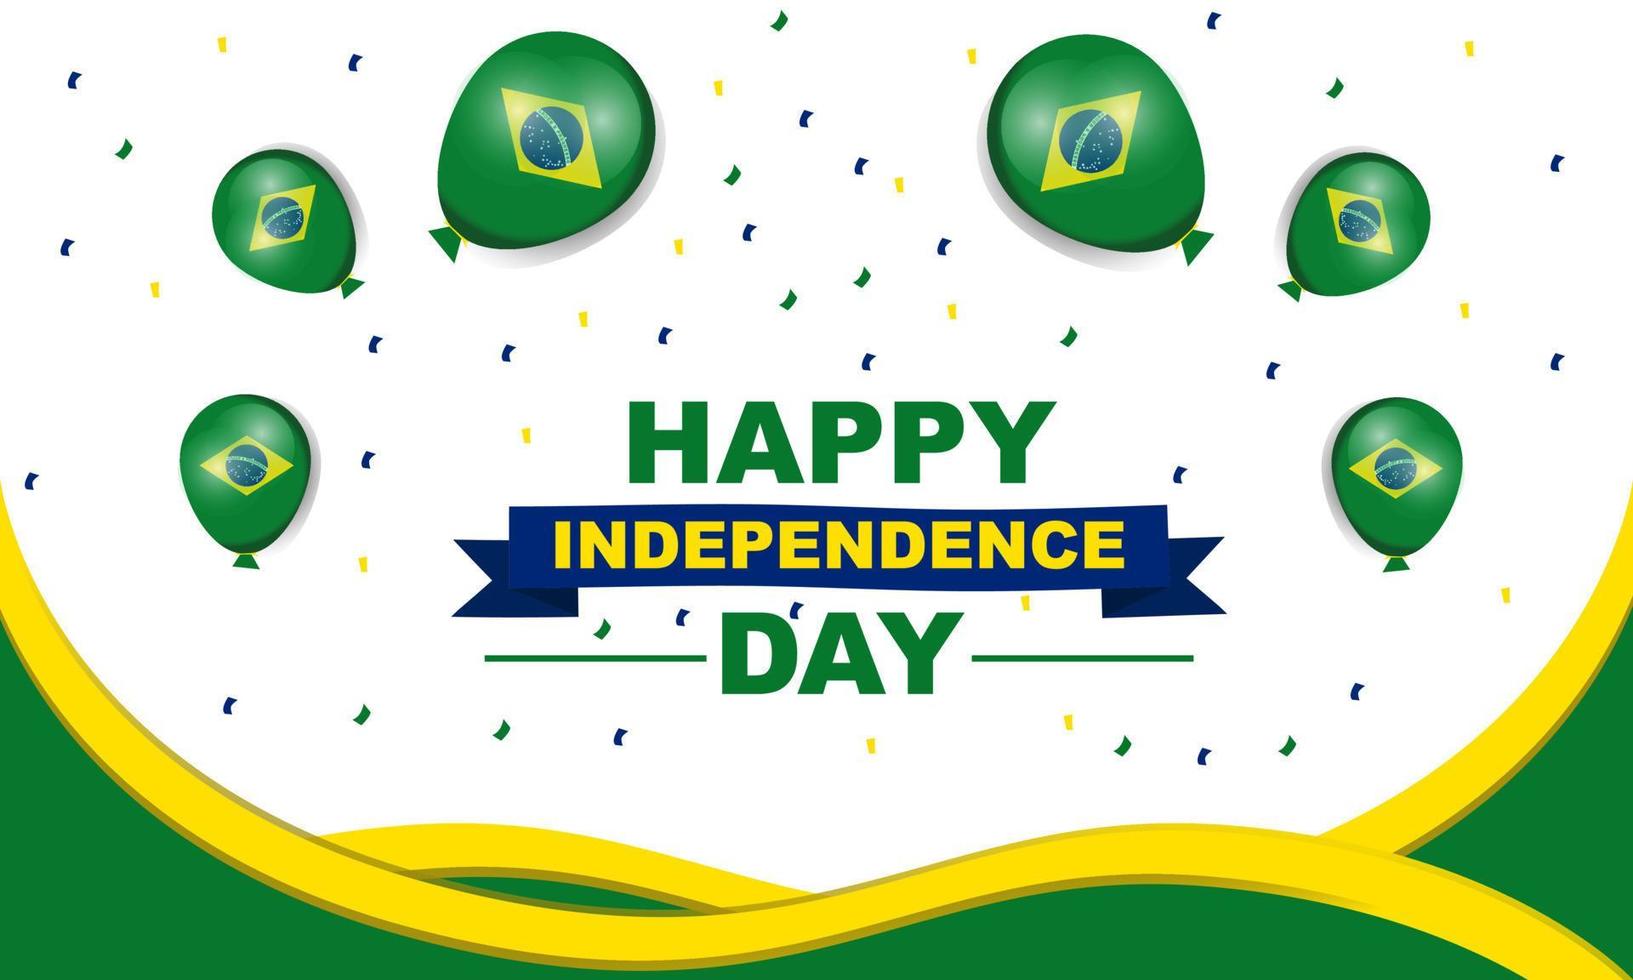 Happy independence day Brazil greeting card with ribbon, vector graphic design